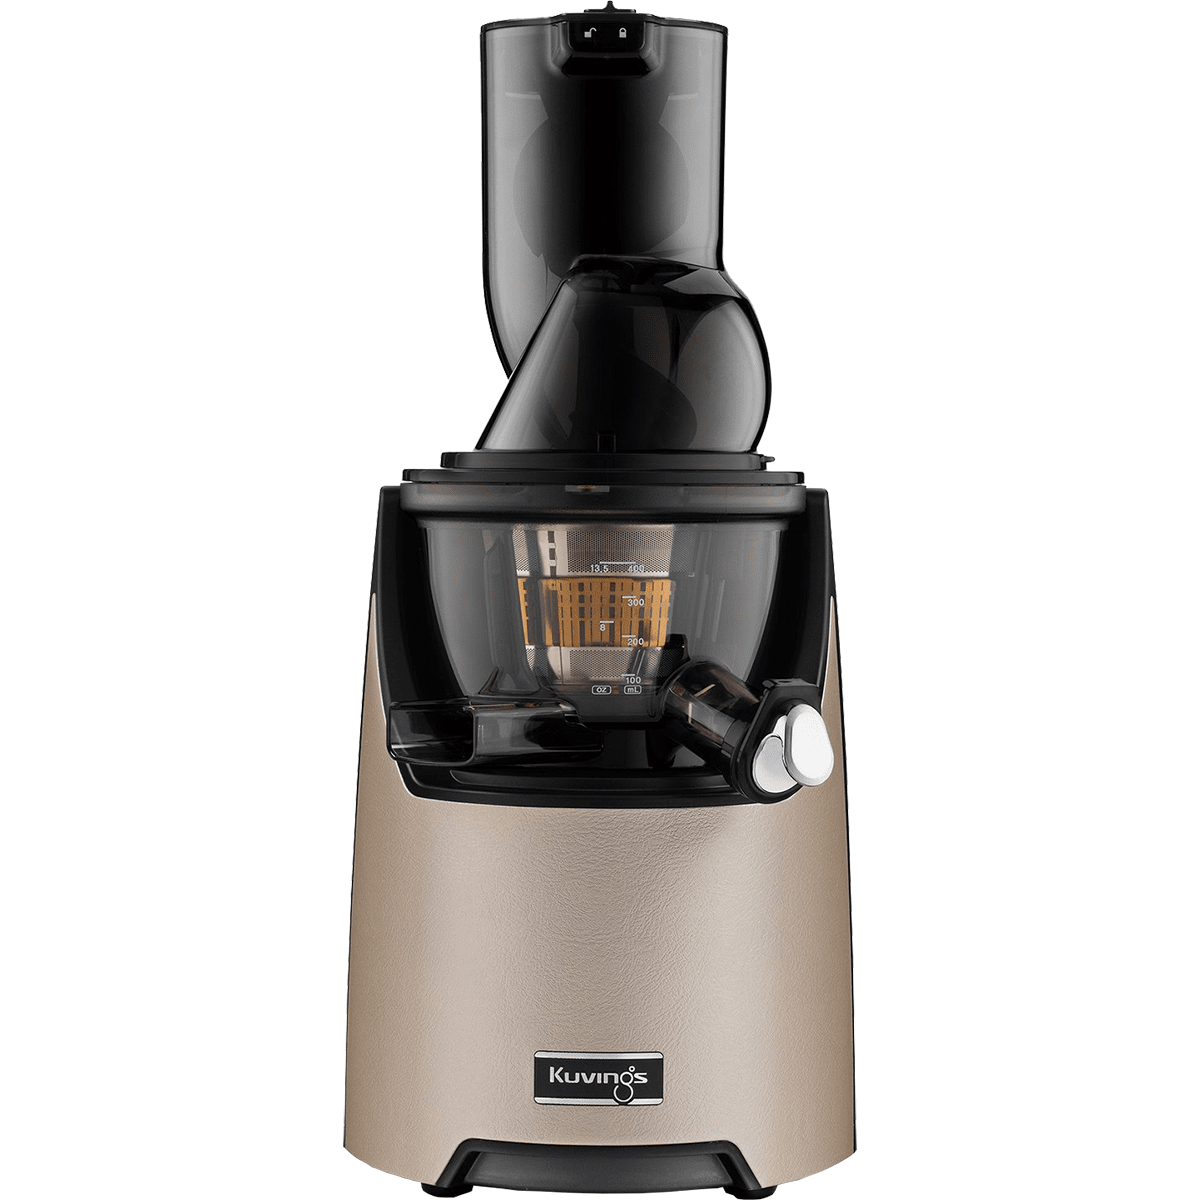 Kuvings Whole Slow Juicer - Champagne Gold